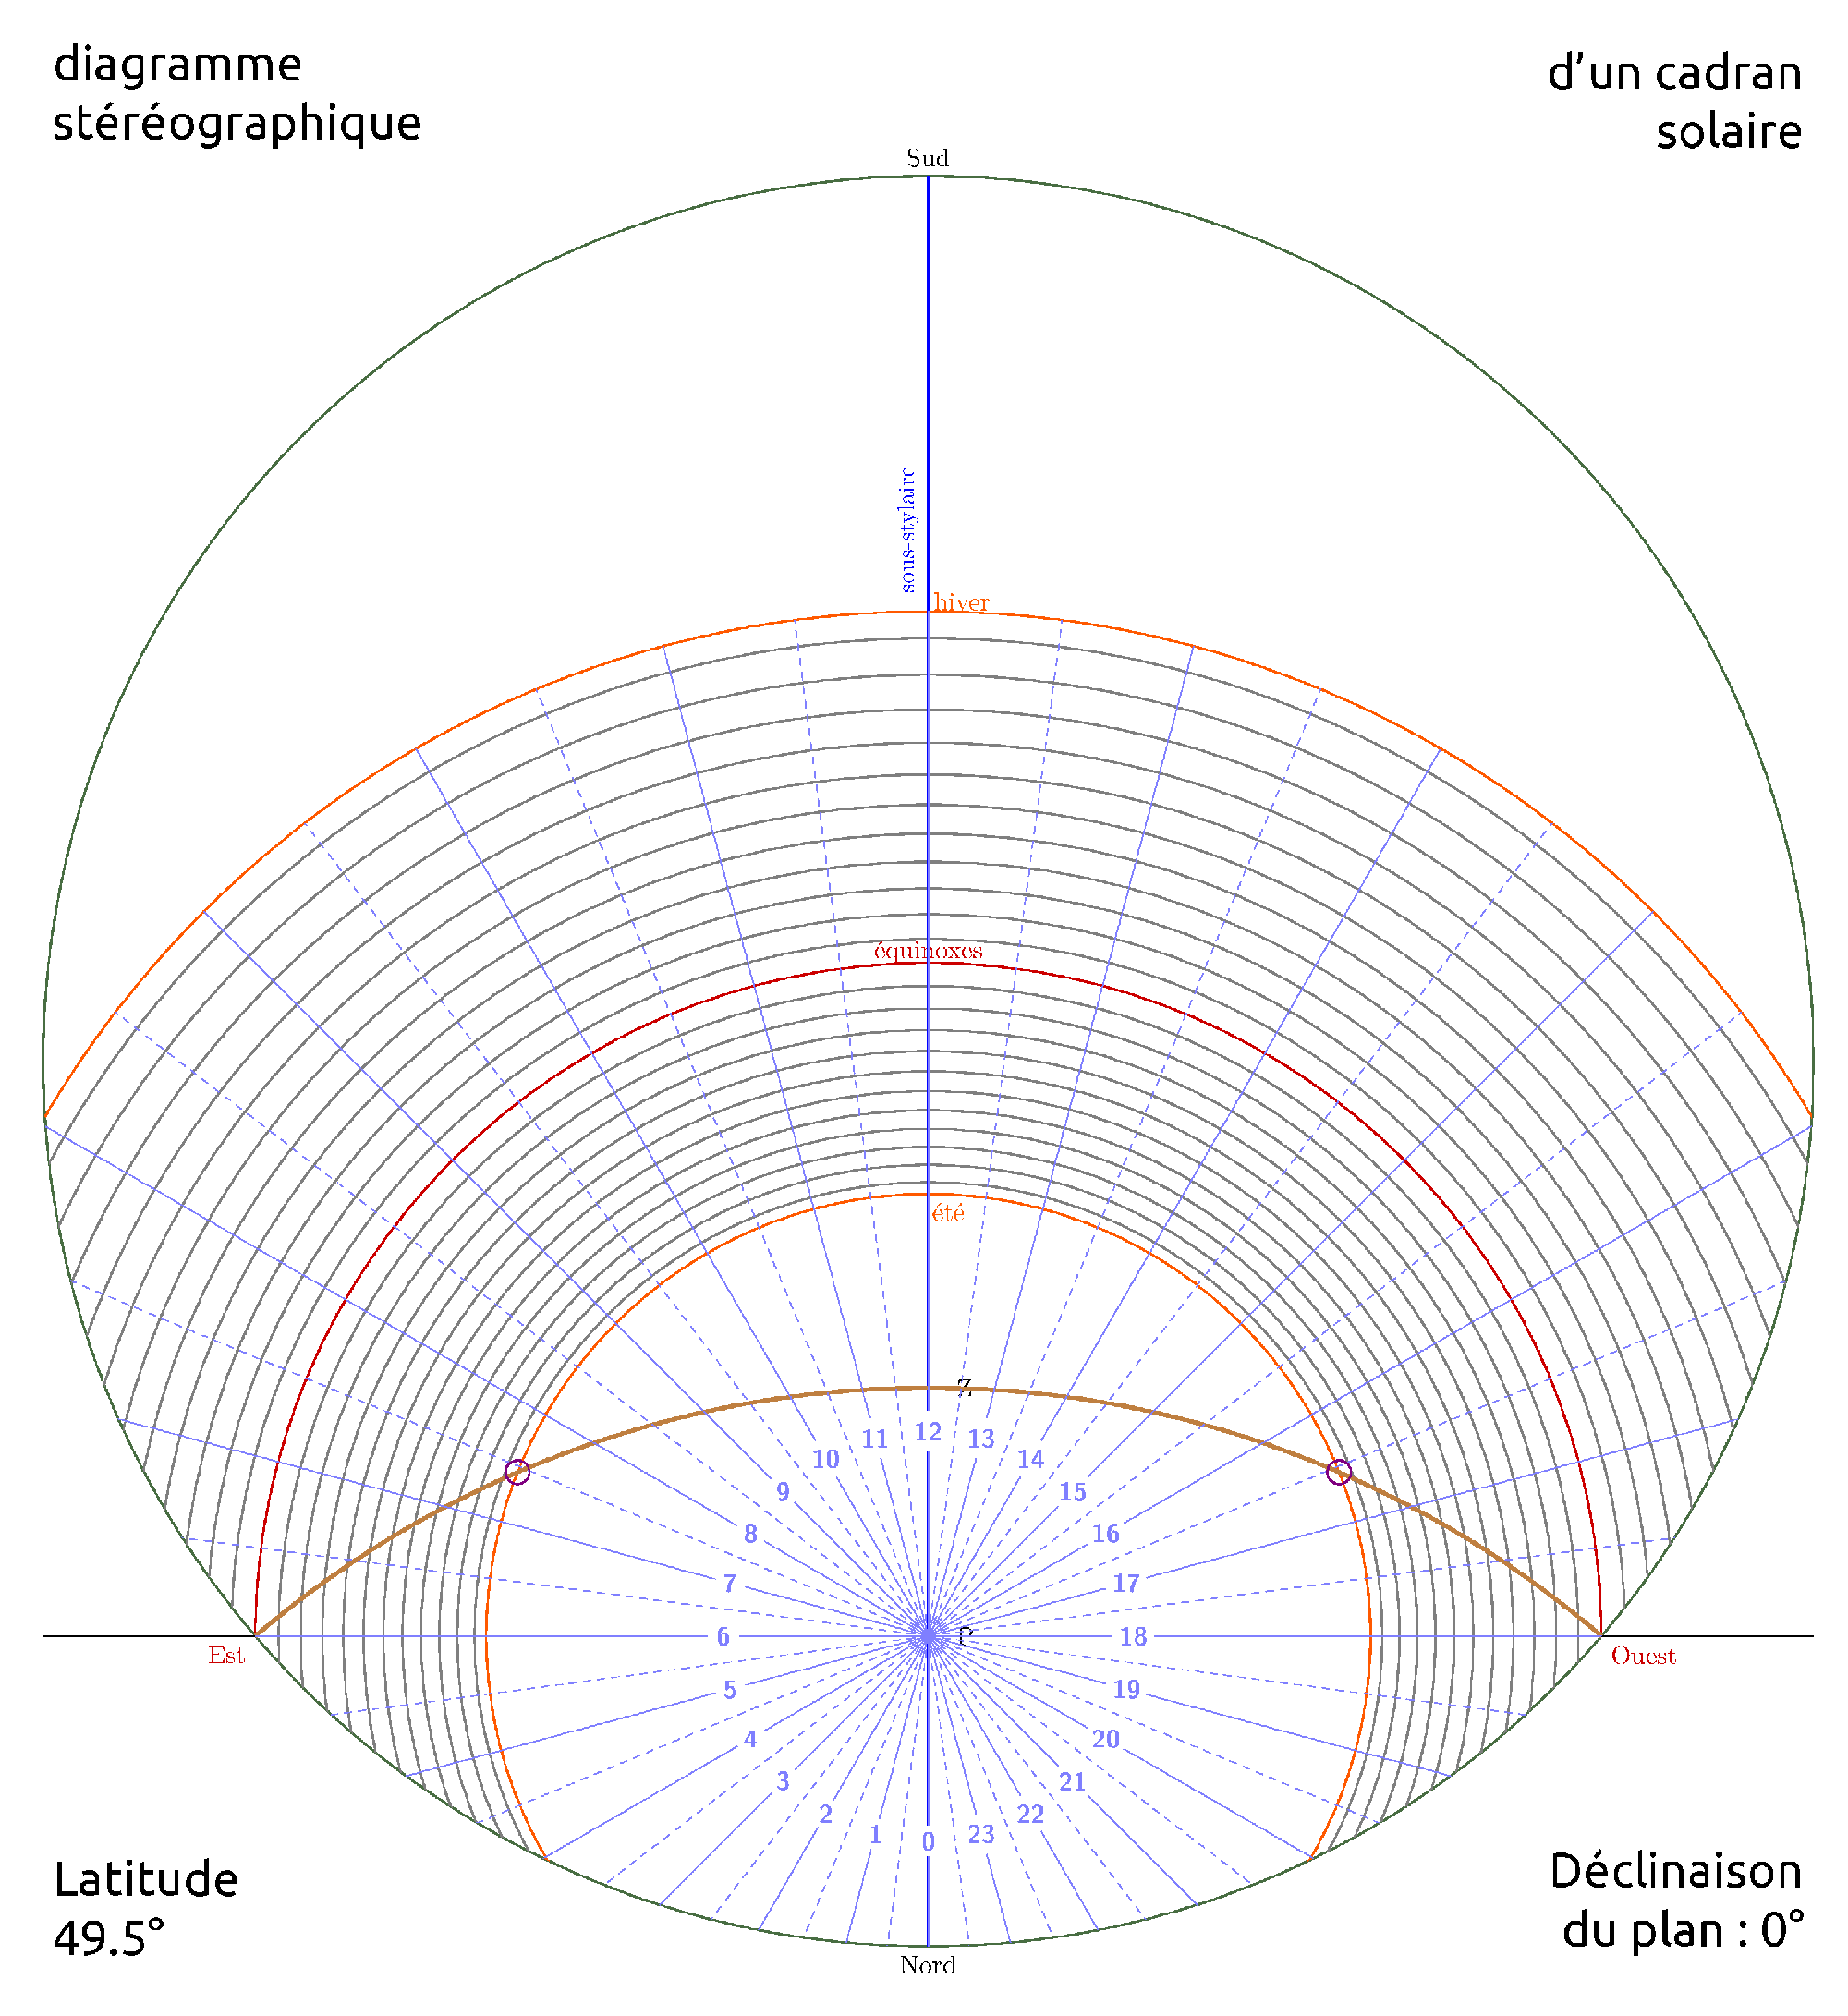 DiagStereographique_495_0b.png